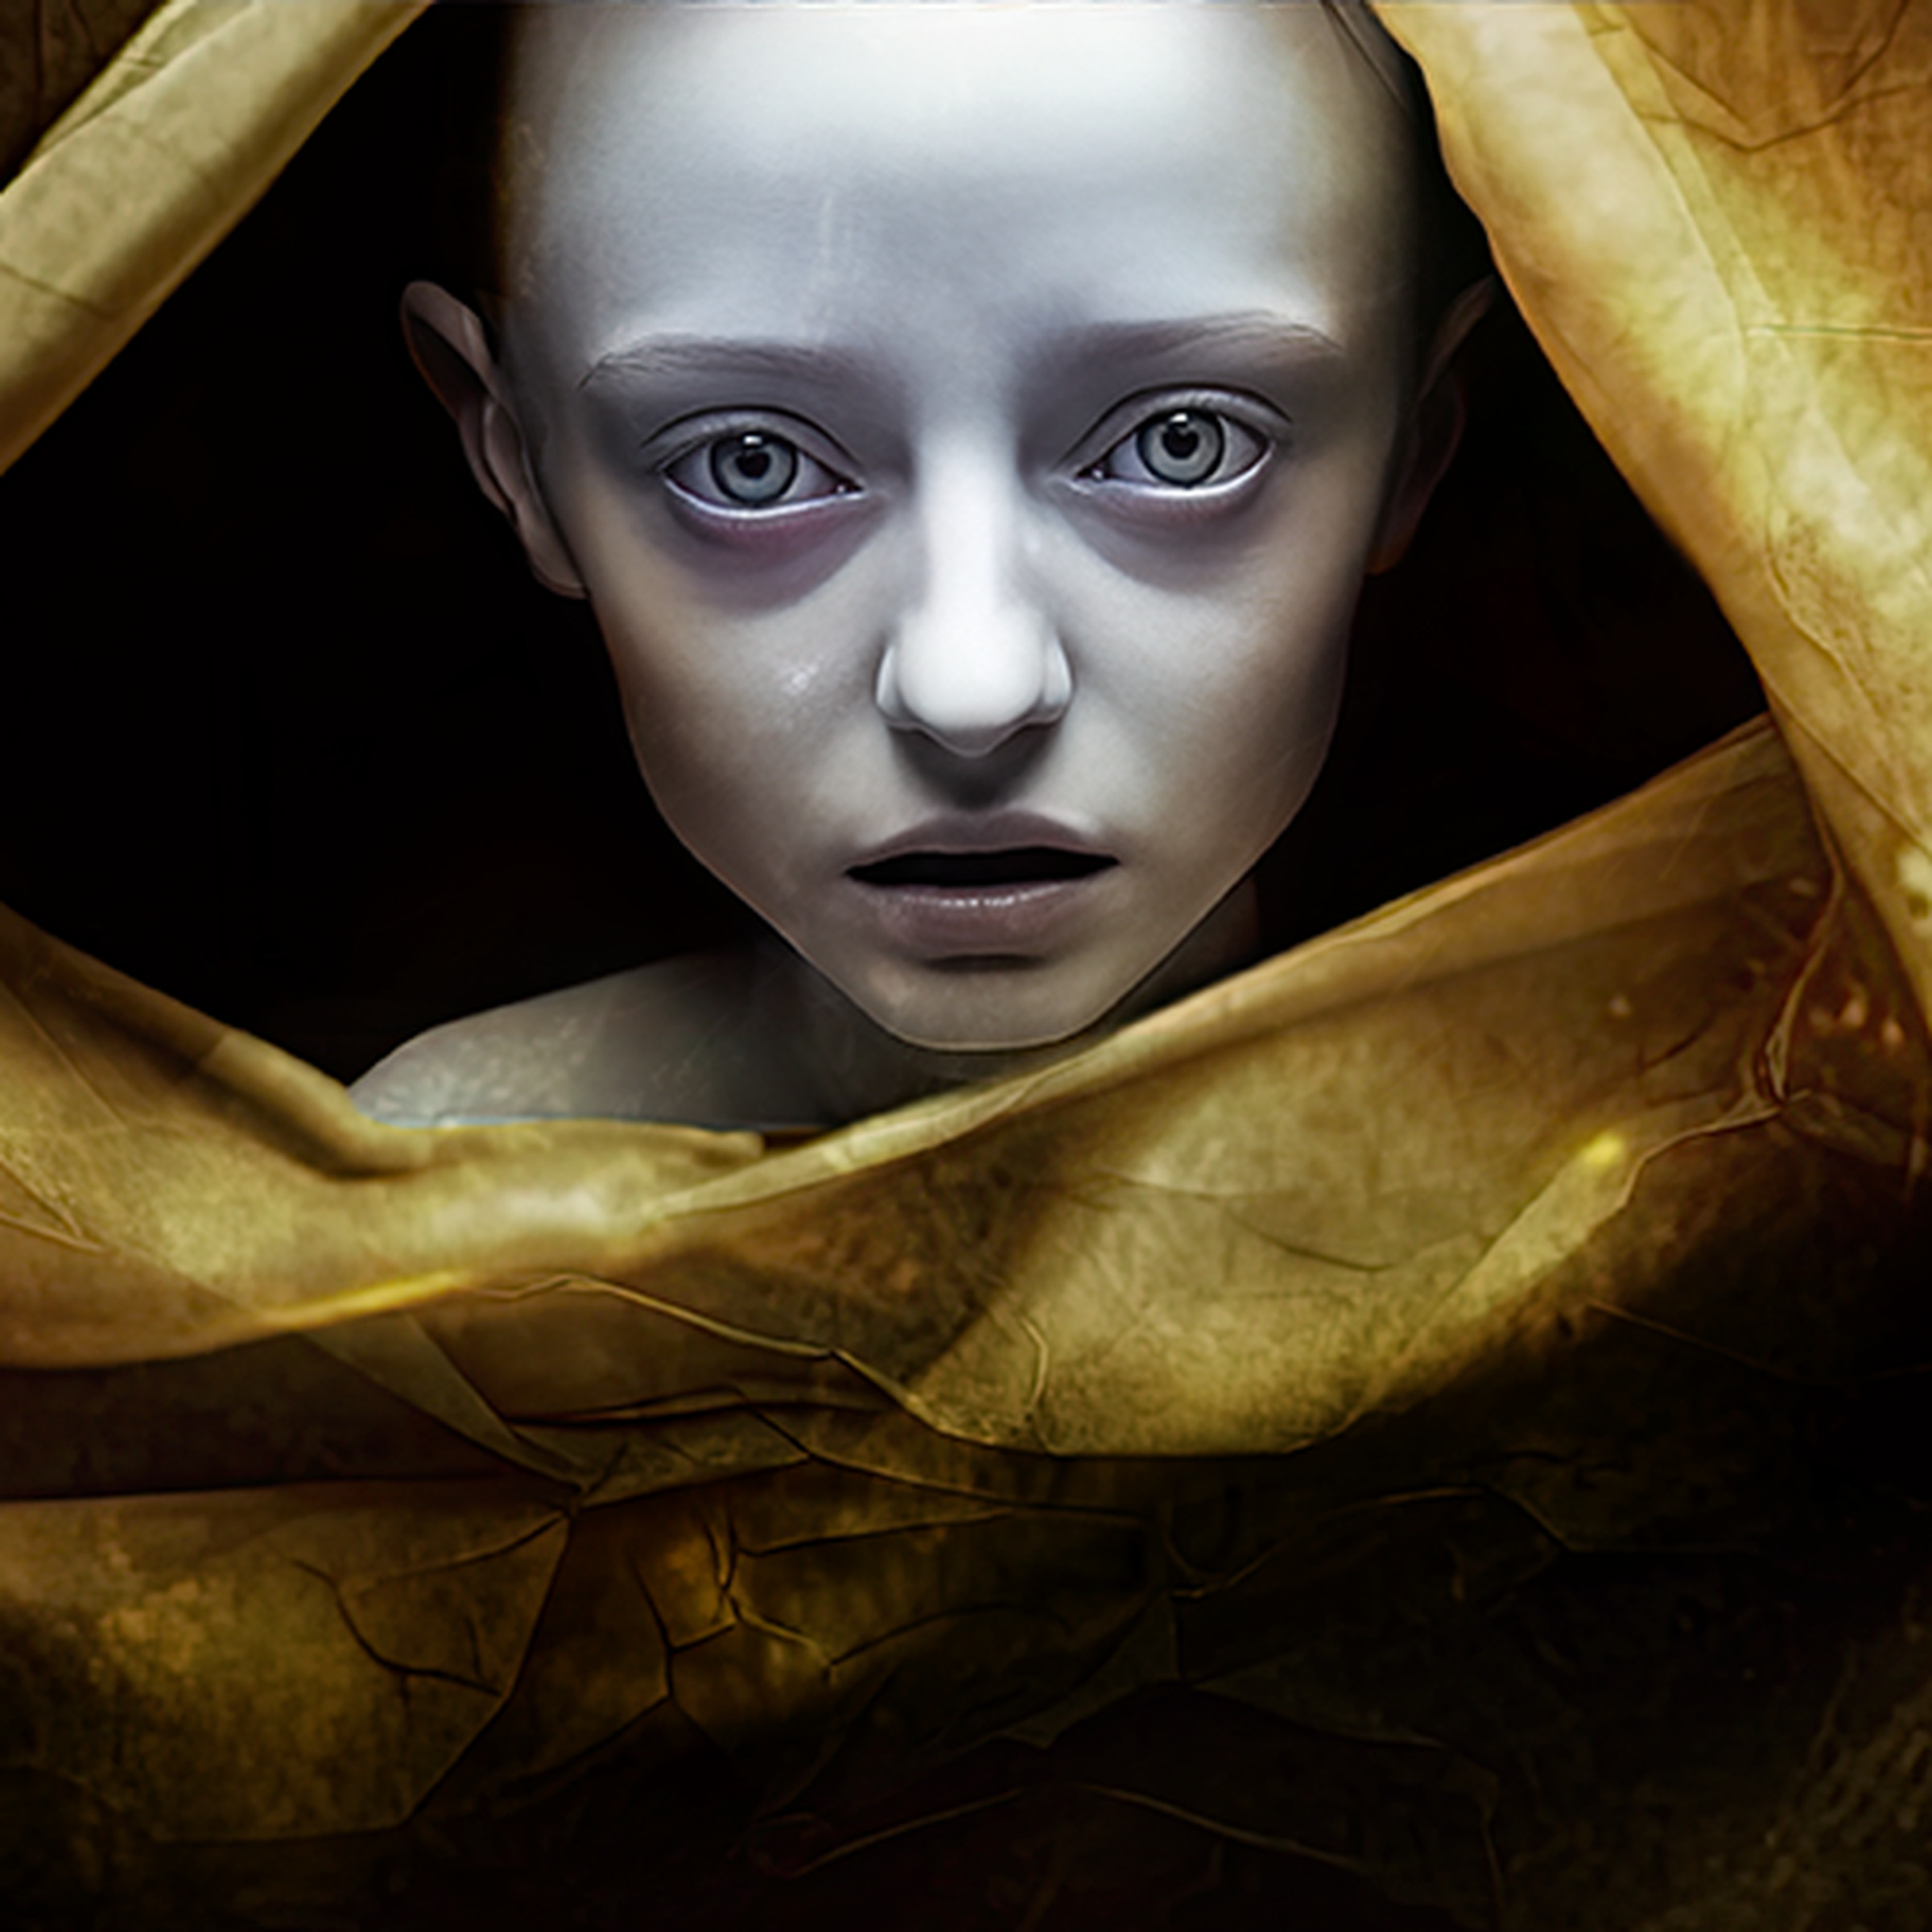 An eerie, child-like figure with gray skin partially hidden behind gold fabric.